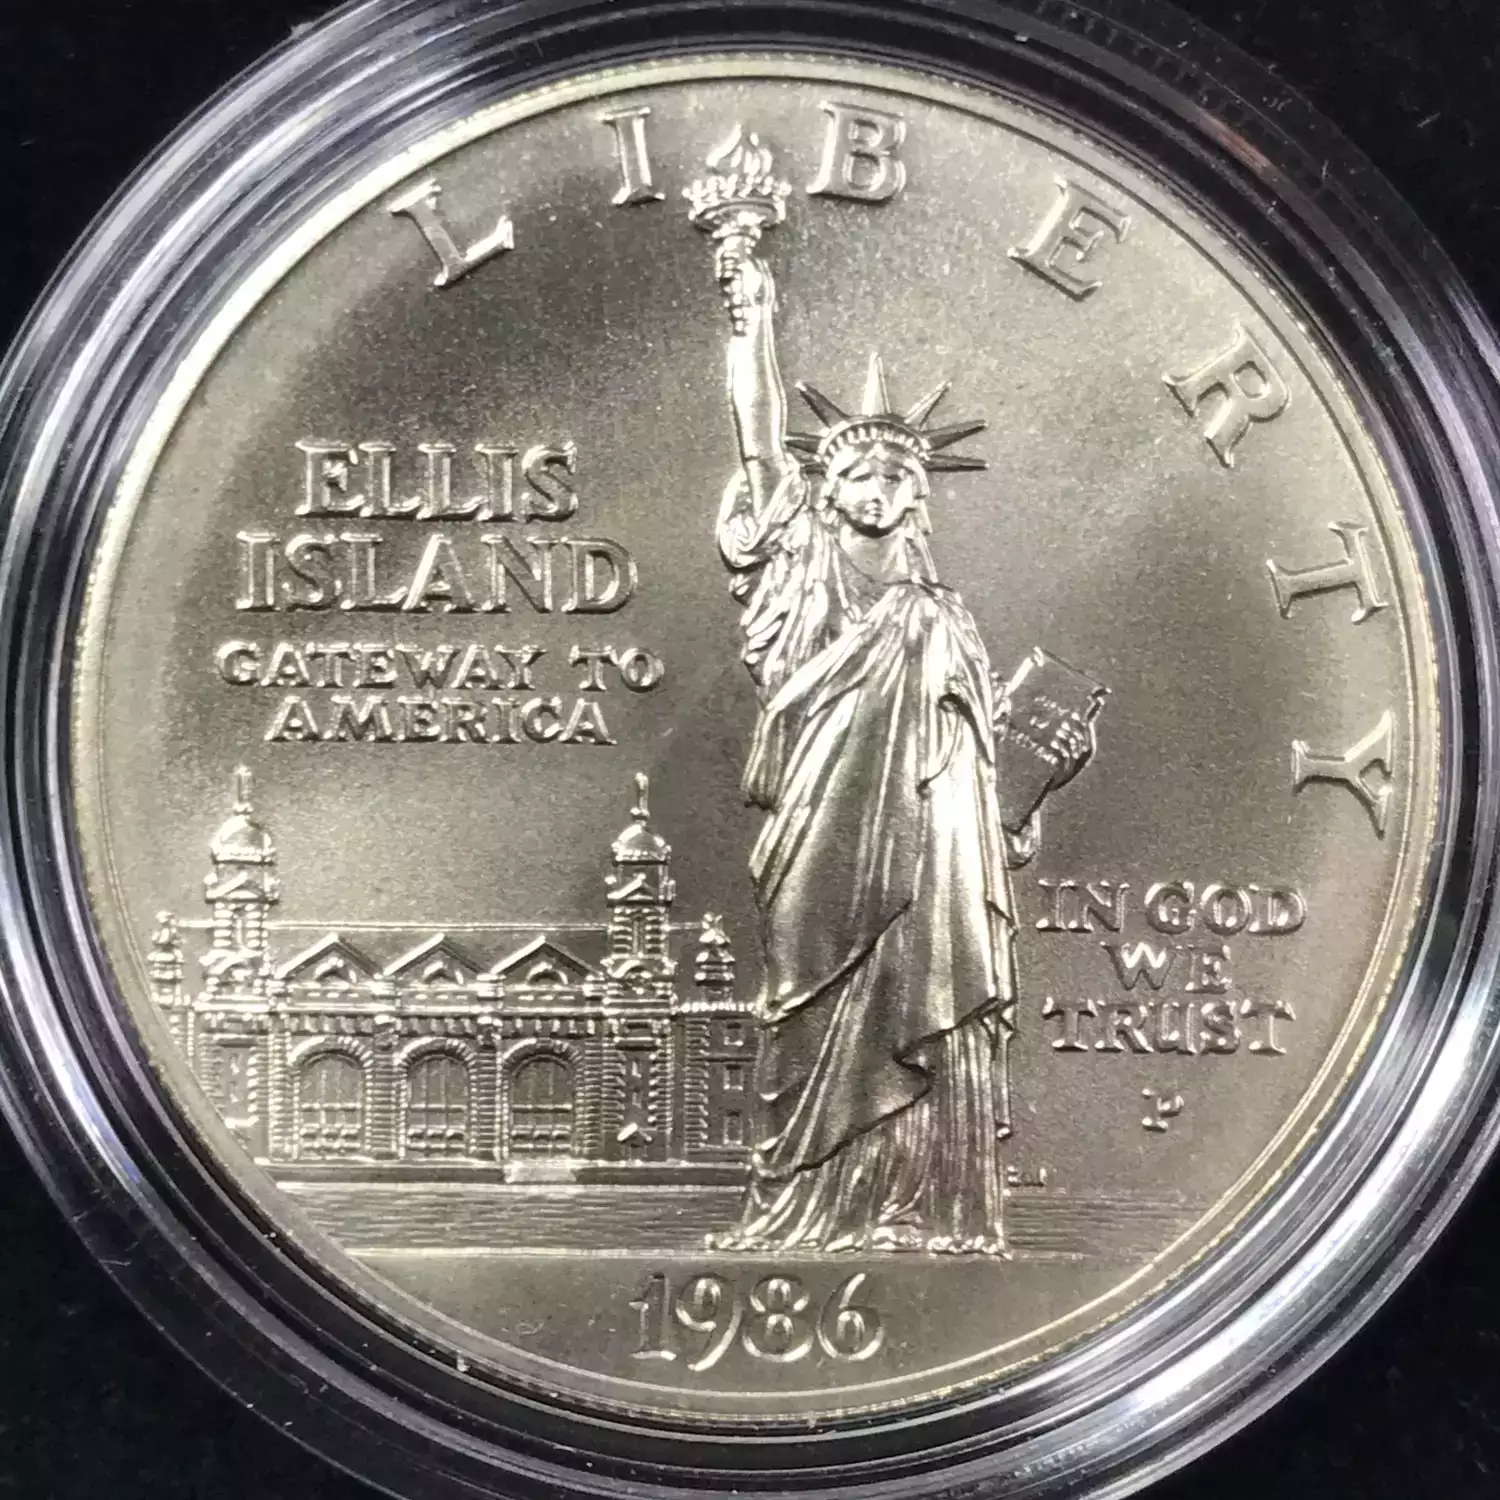 1986-P Statue of Liberty Silver Dollar - Uncirculated with Box & COA (3)